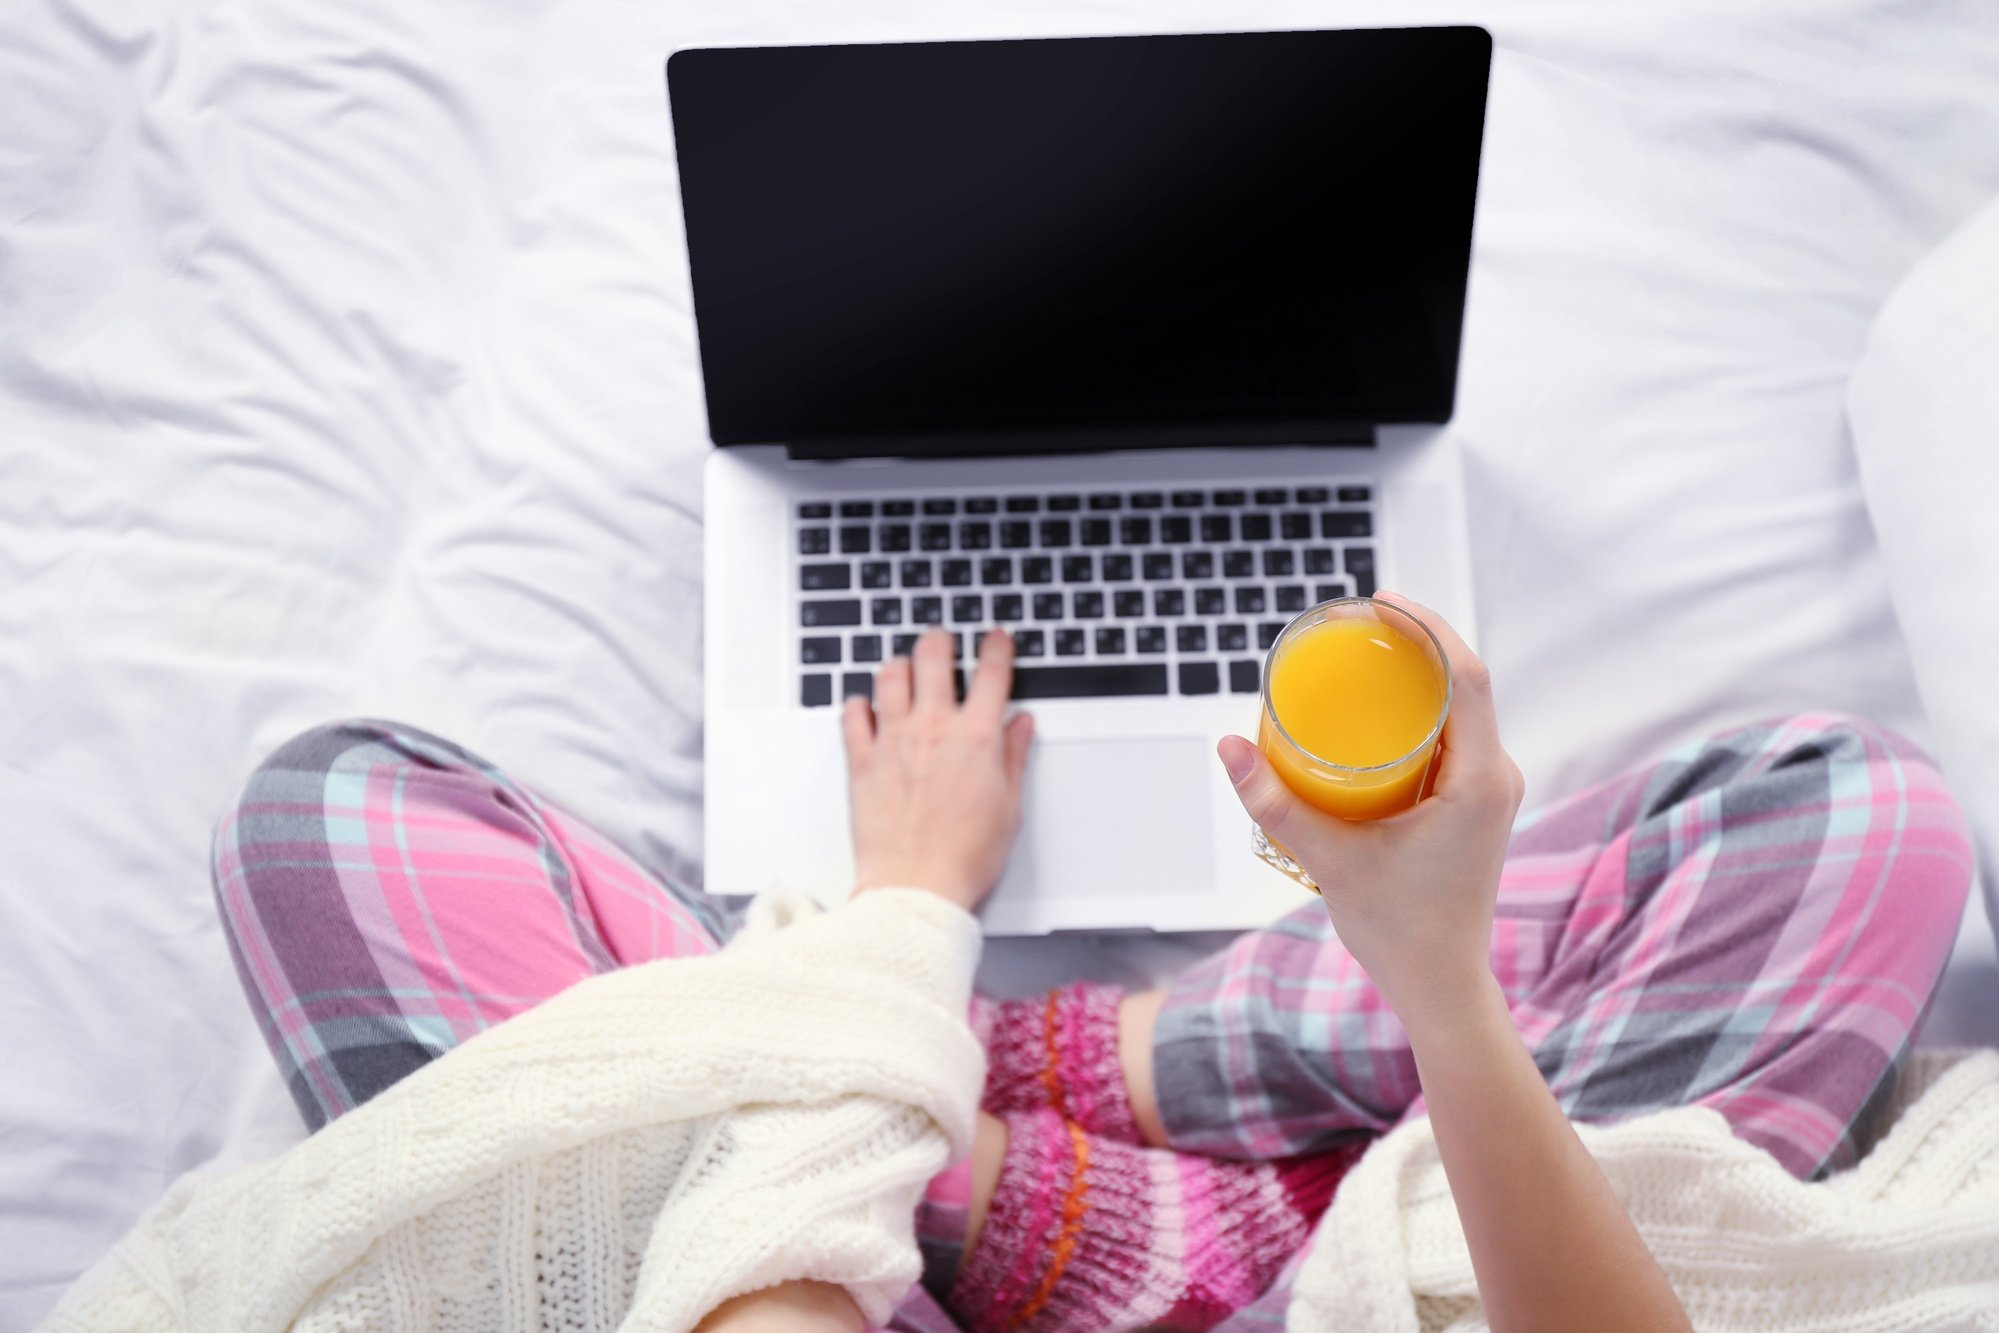 Get Out of Your Pajamas! How to Dress for Webcam Meetings